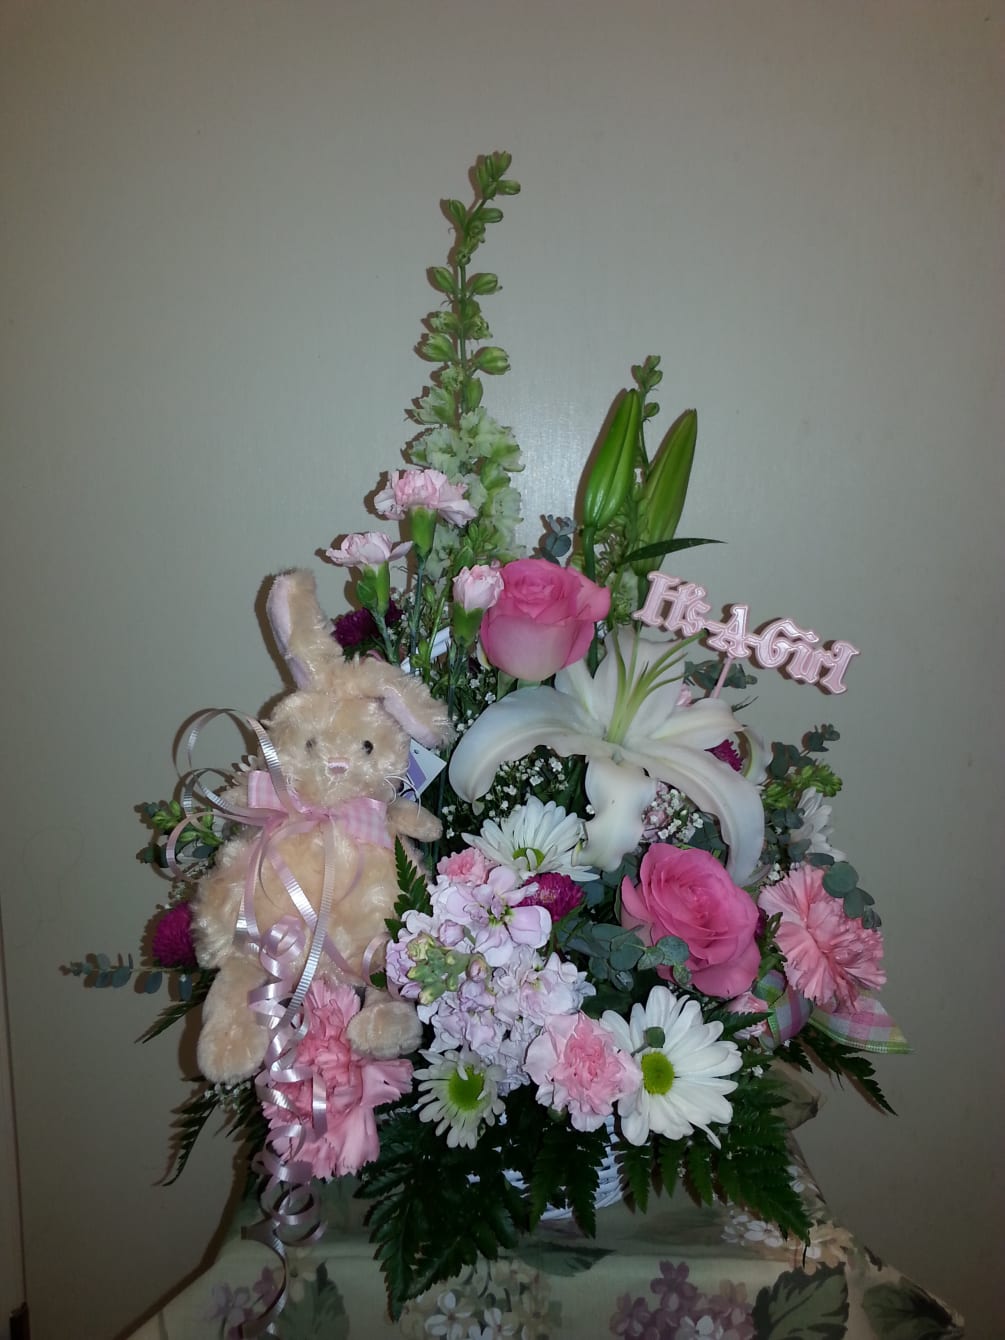 Pink and white floral mix with Roses, Lilies,and Daisys and Cute Bunny